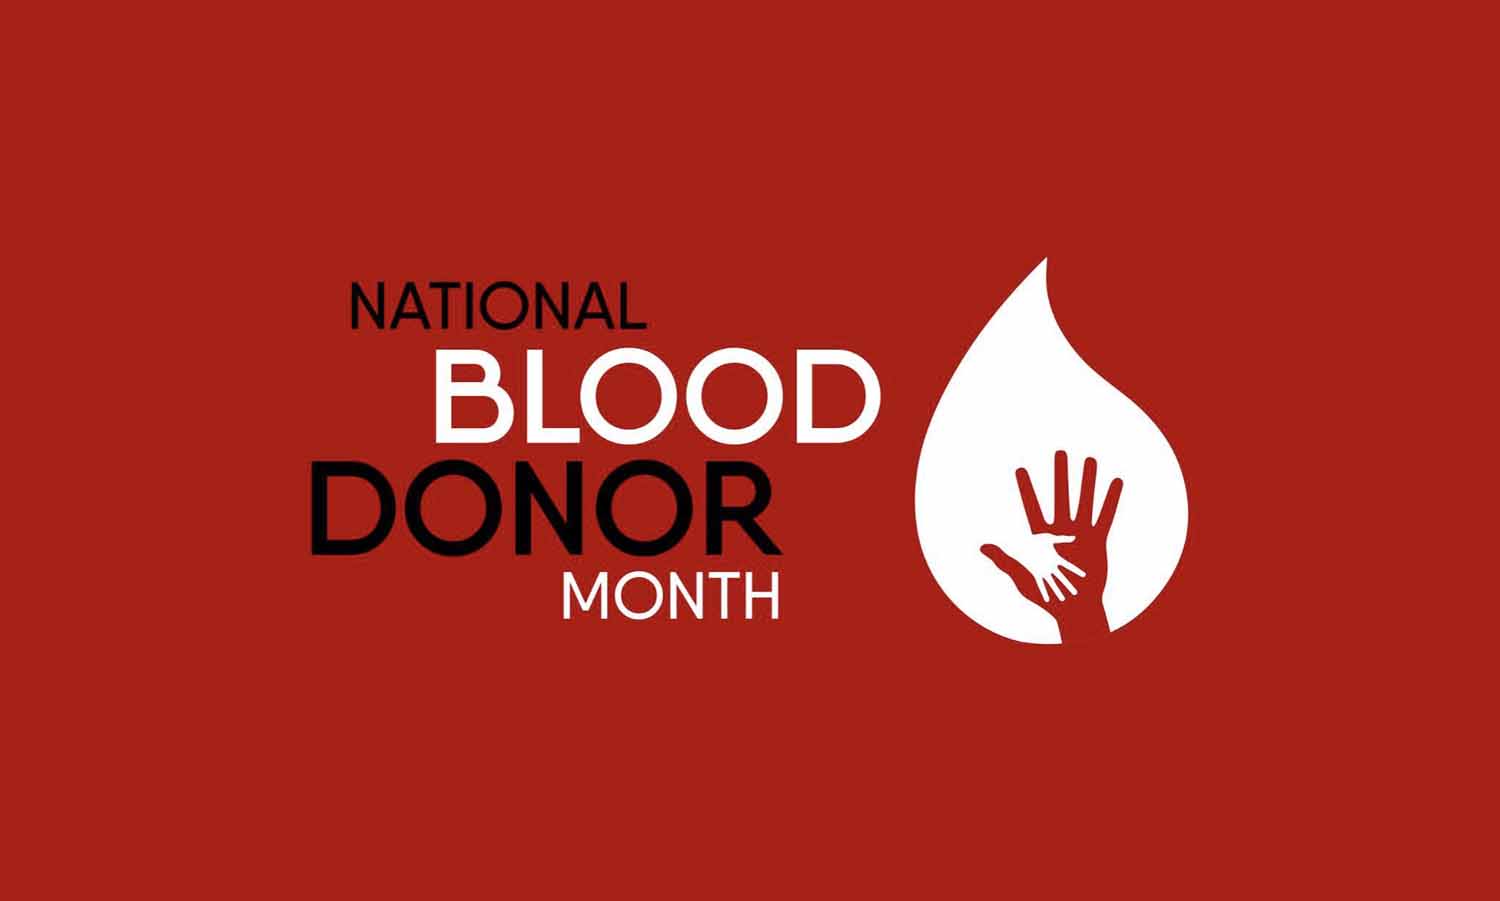 Red vector illustration for National Blood Donor Month in January